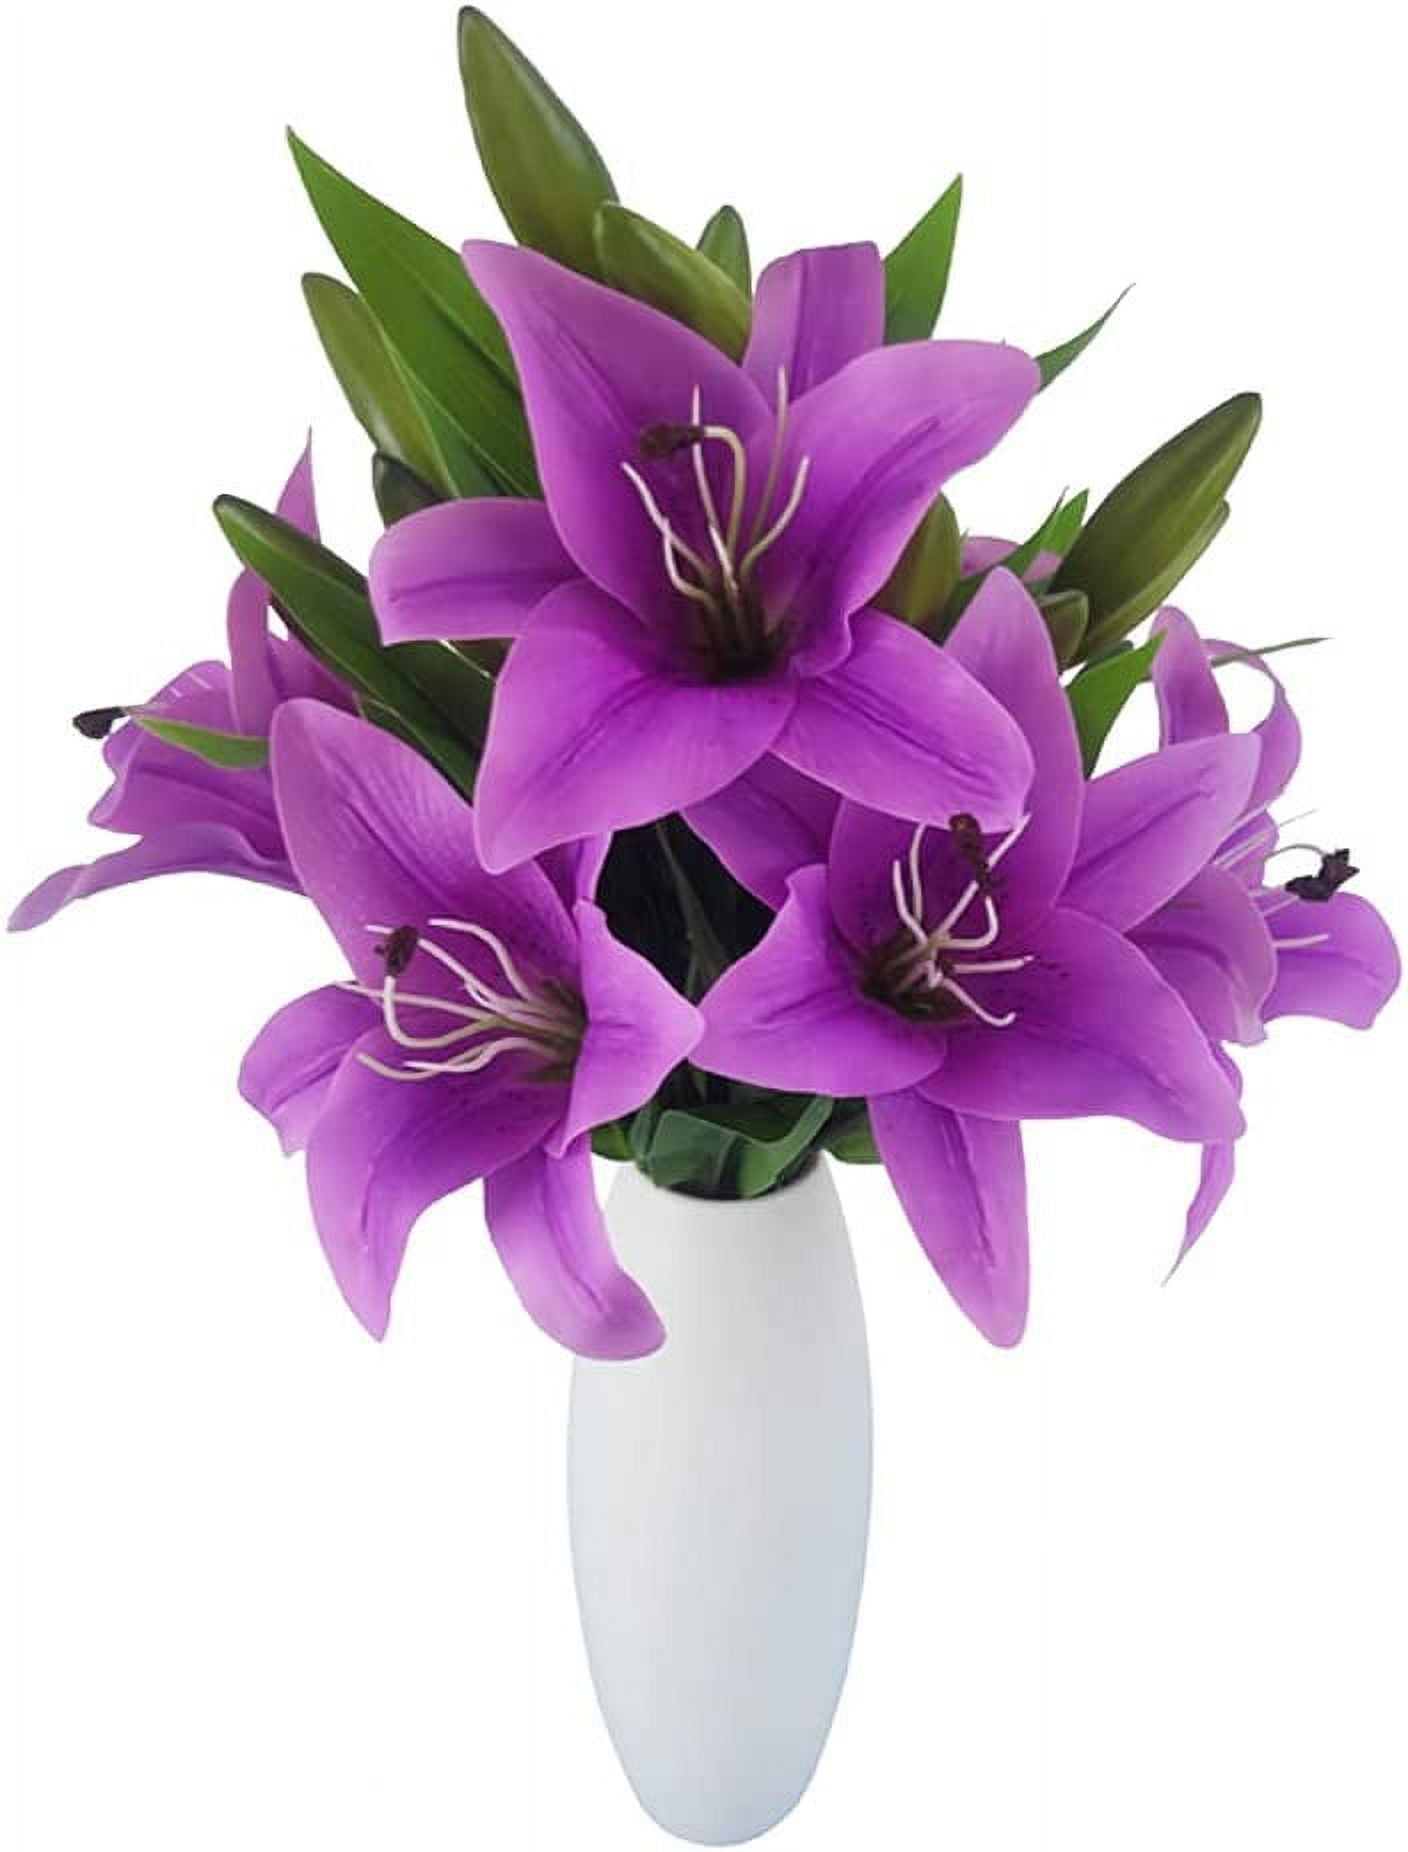 Real Touch Flowers - Artificial - Akshar Flowers